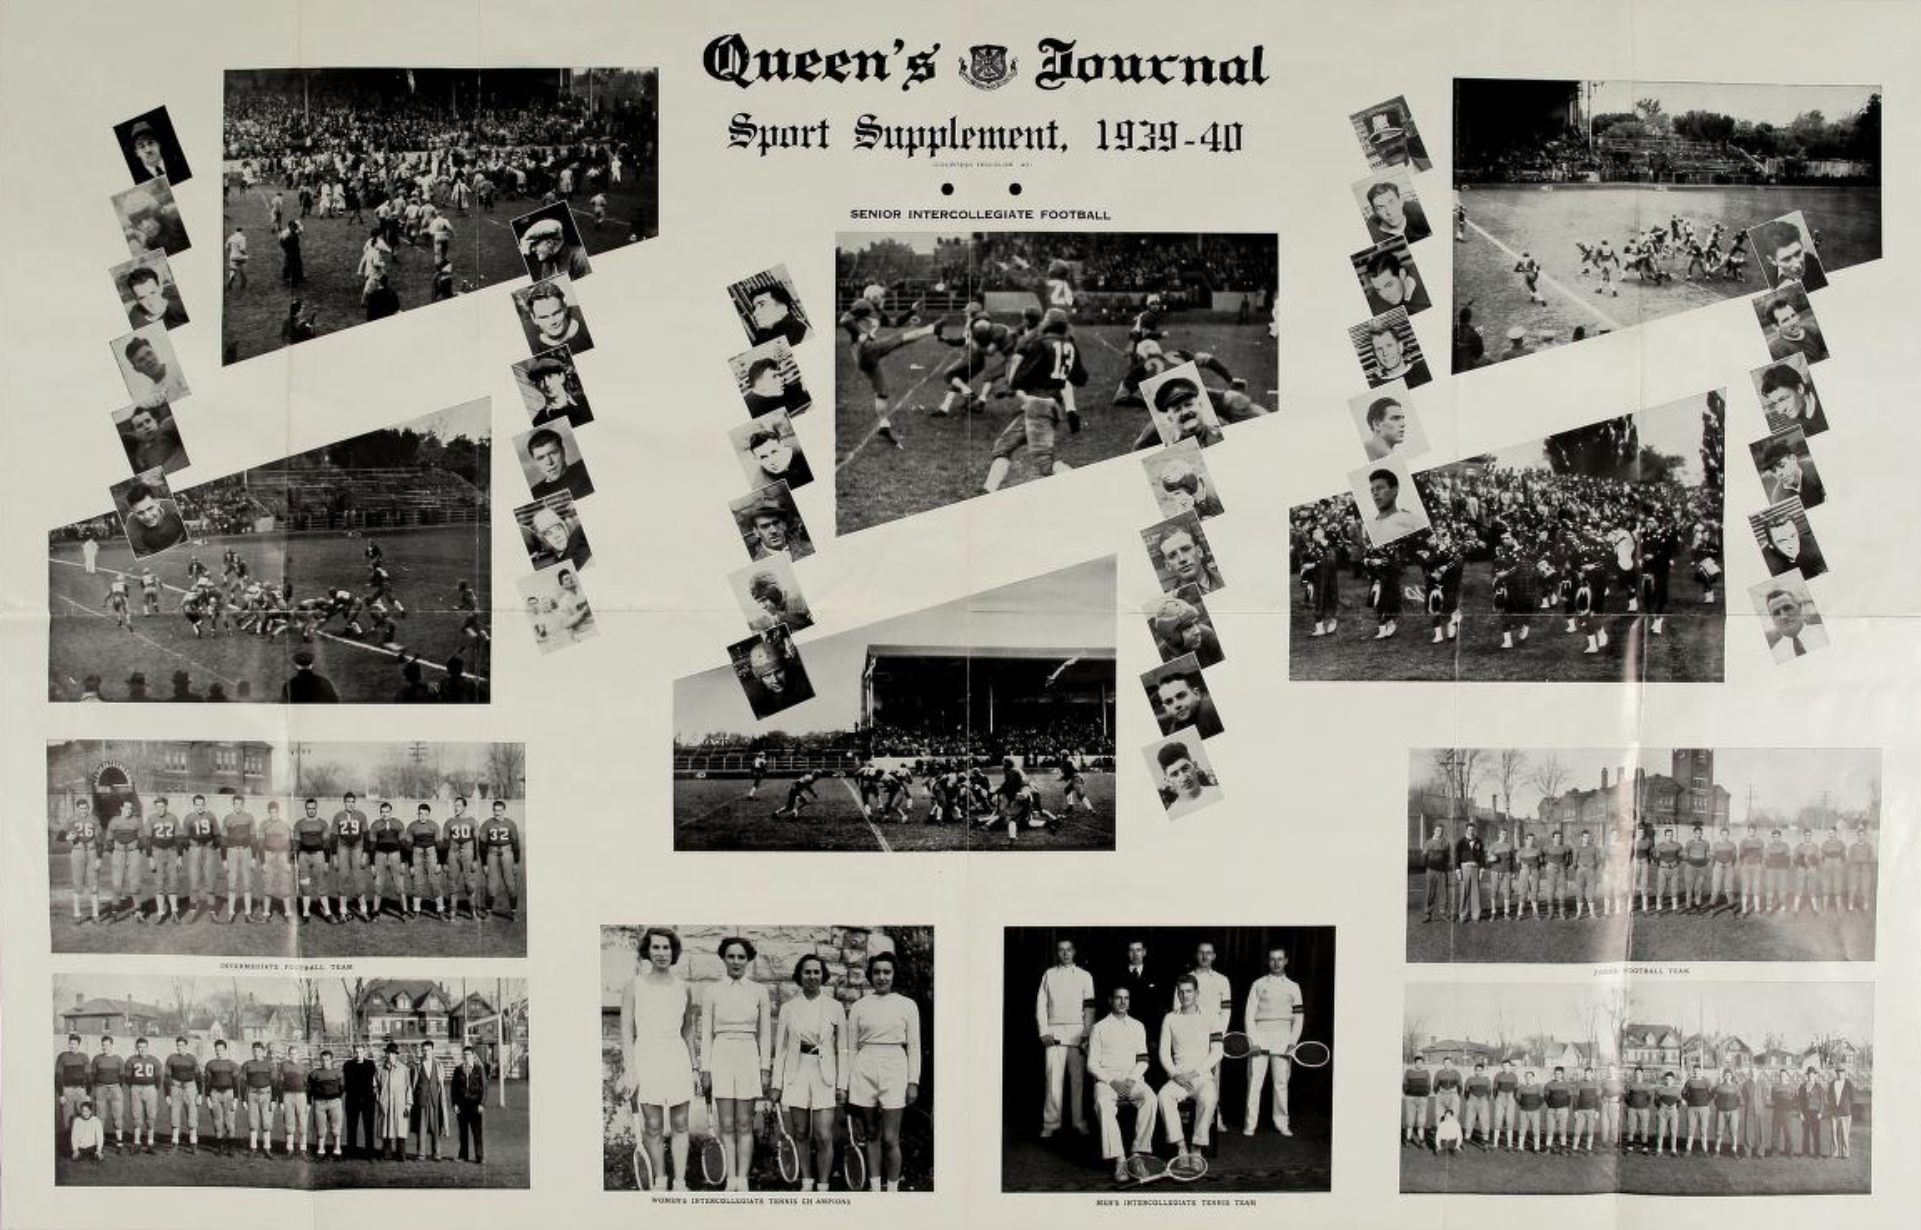 Scan of the Queen's Journal. It shows a two-page spread featuring black-and-white photos of various athletic teams.